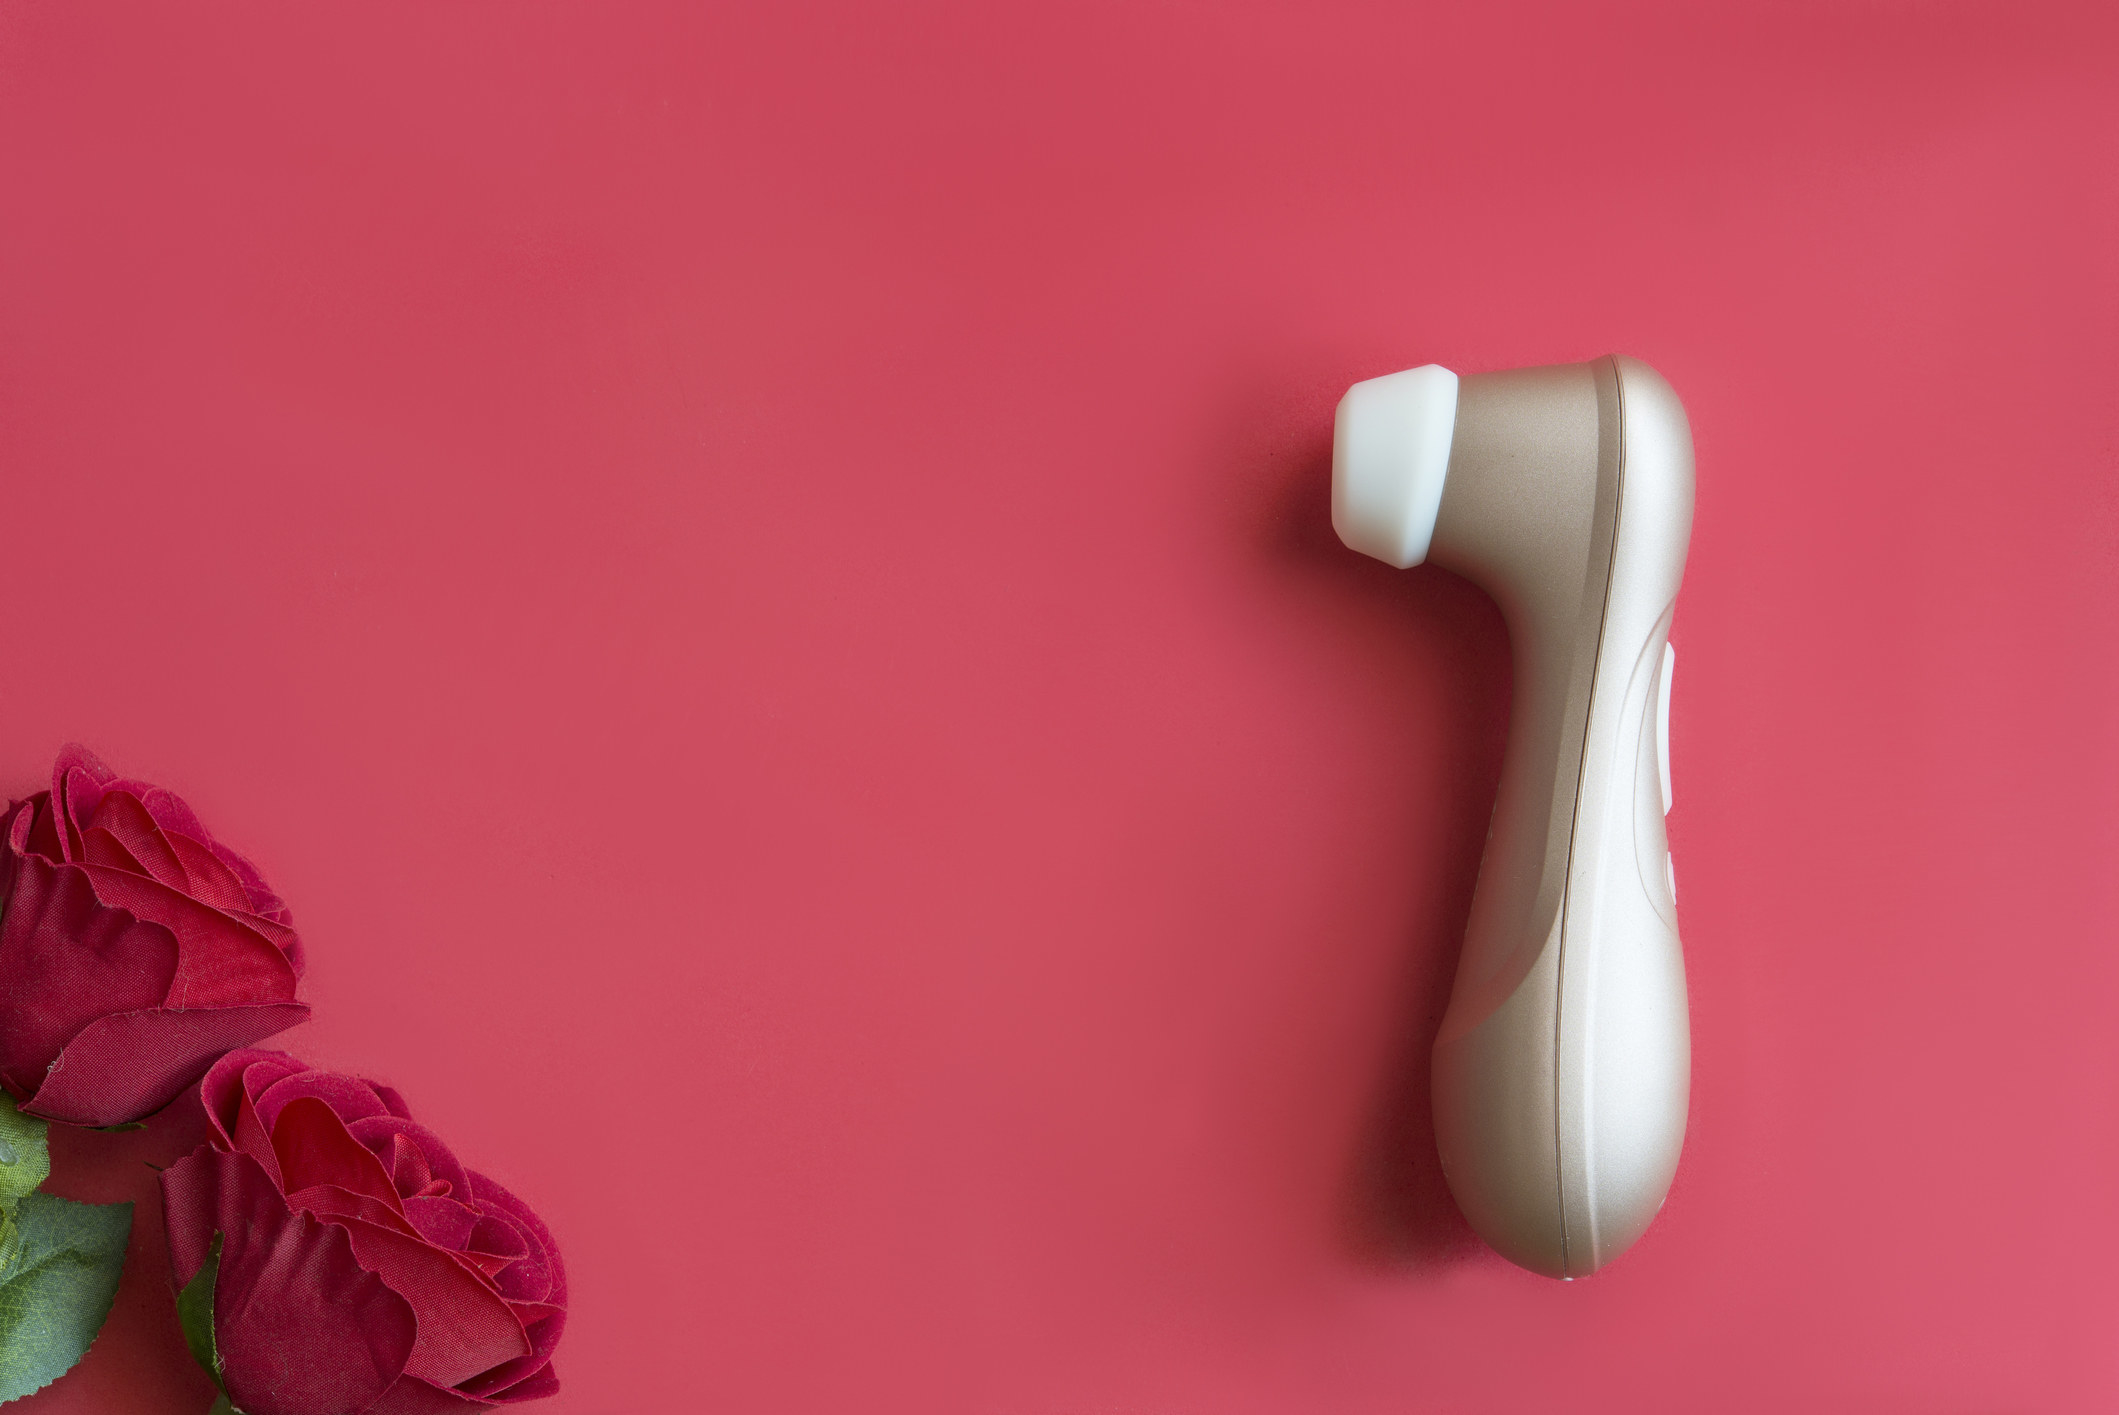 An image of a sex toy on a red background with roses